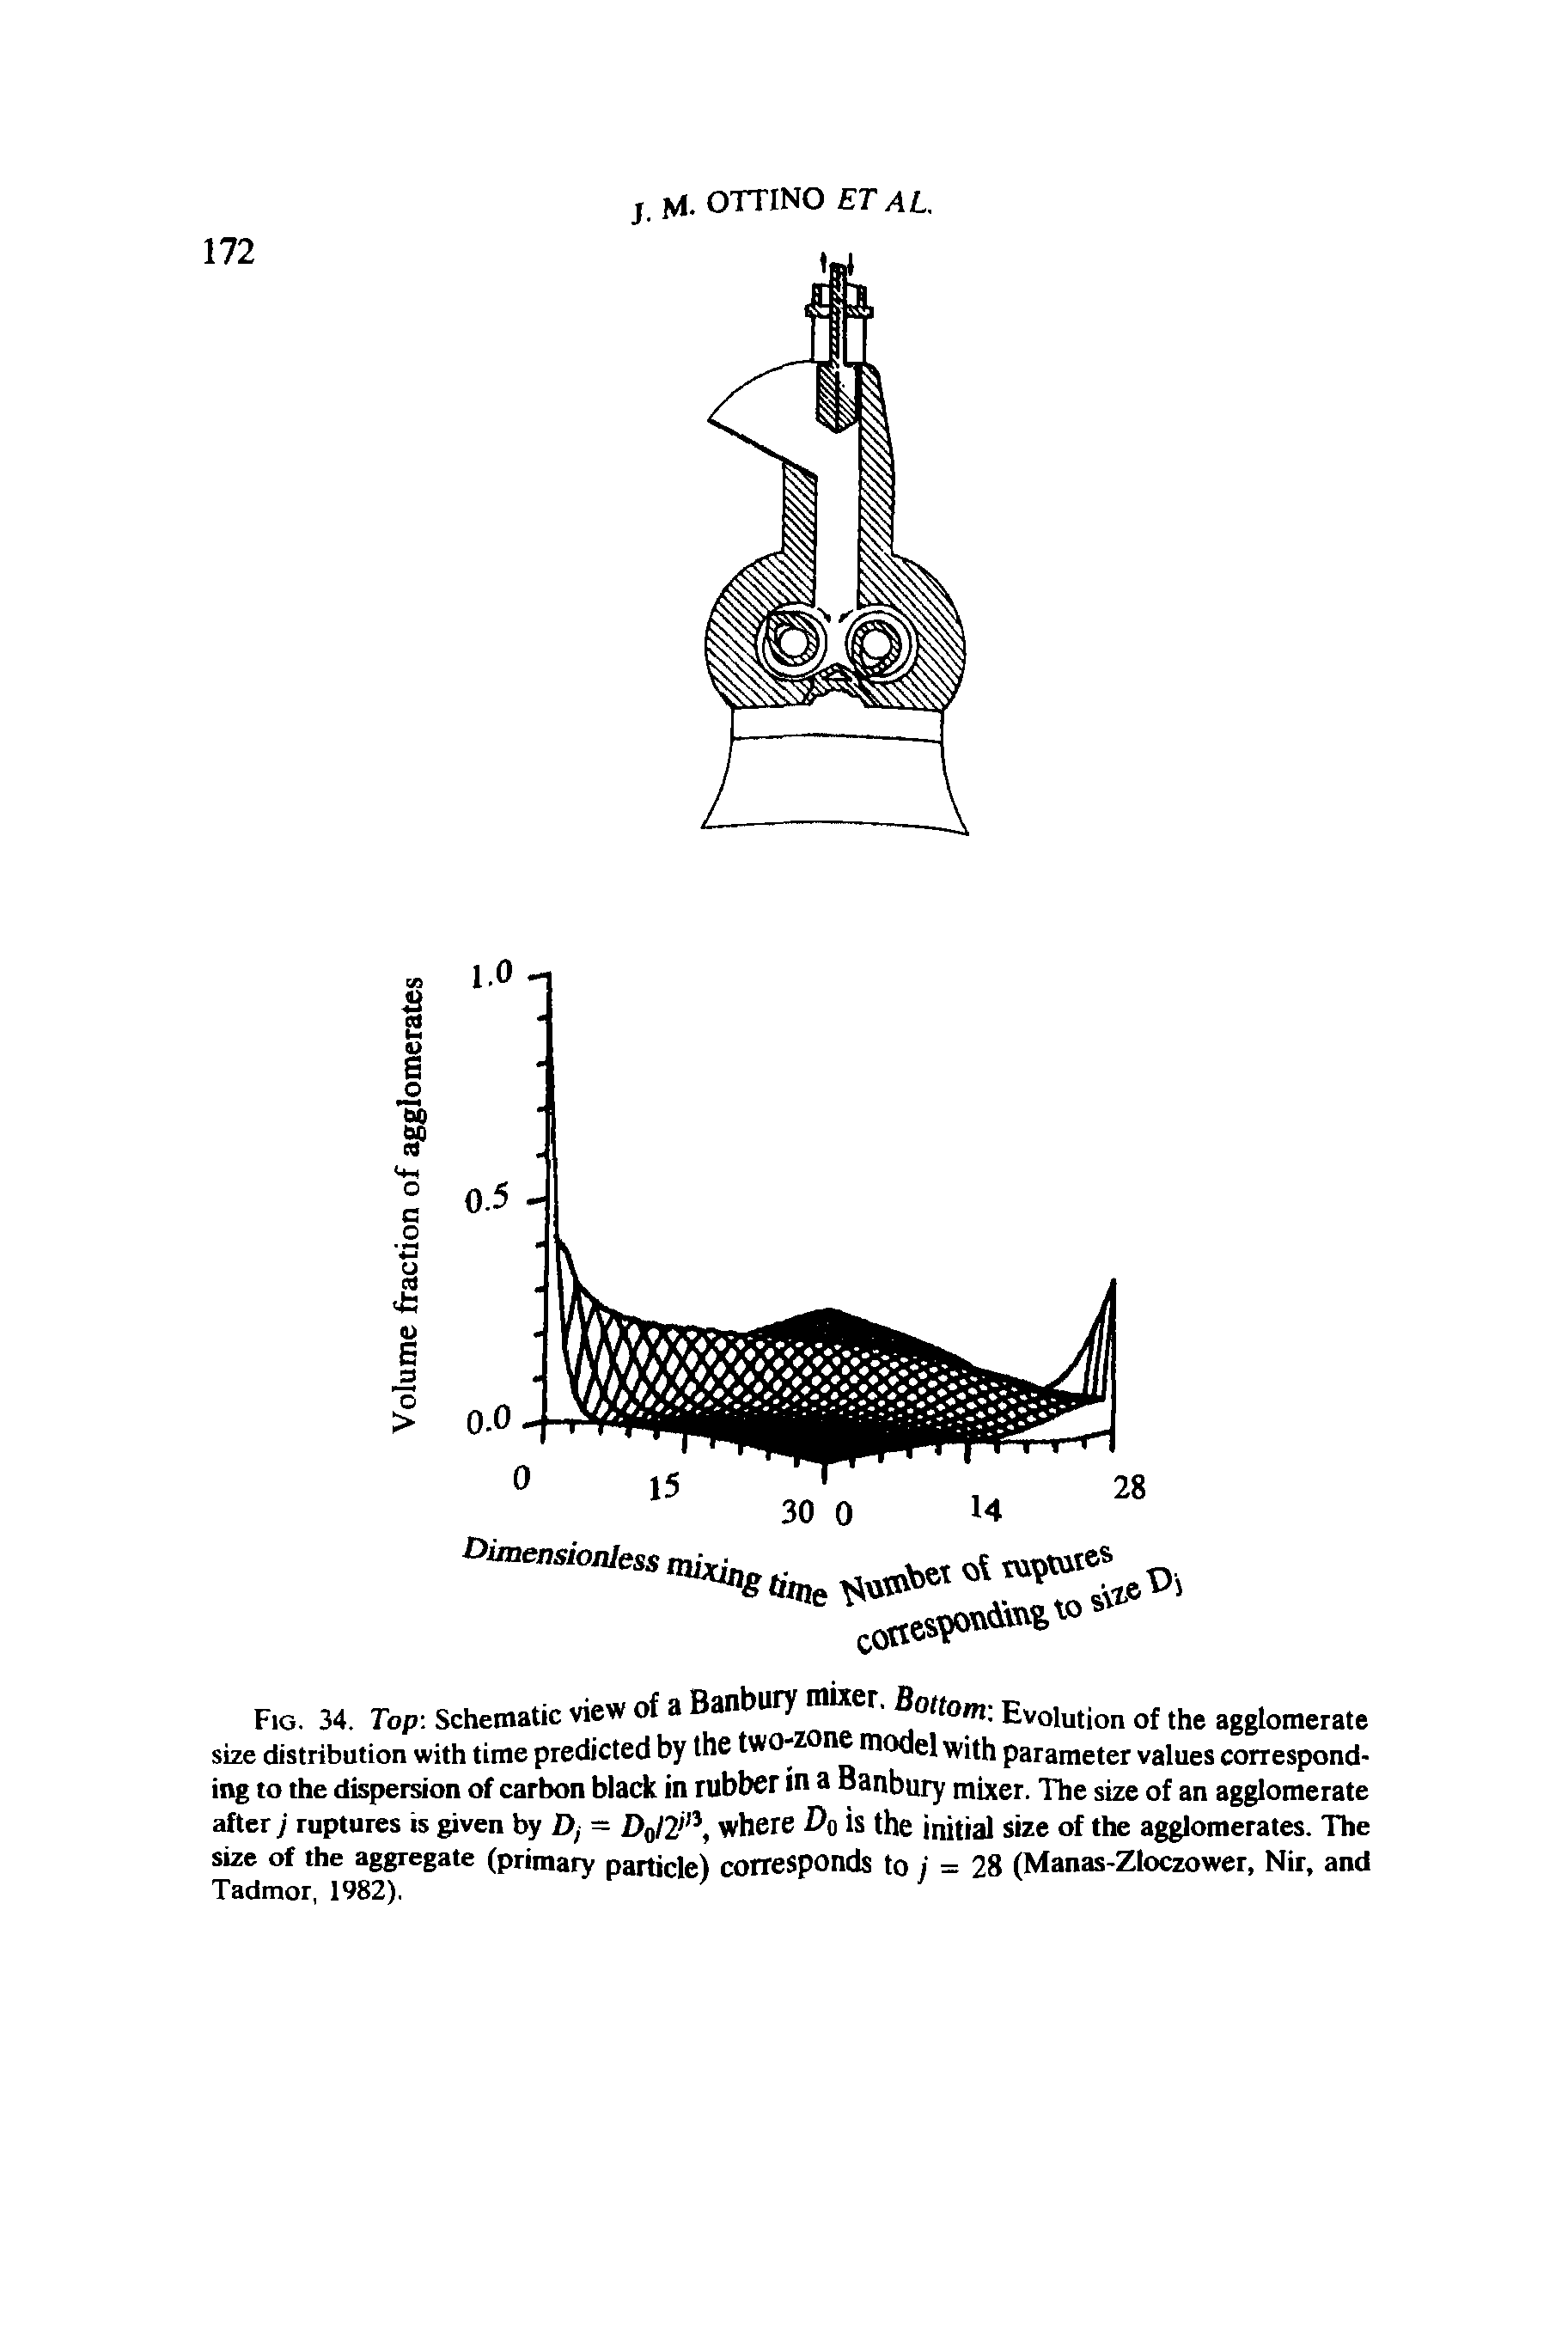 Fig. 34. Top Schematic view of a Ban ry Offo/n Evolution of the agglomerate size distribution with time predicted by the two-zone model with parameter values corresponding to the dispersion of carbon black in rubber in a Banbury muter. The size of an agglomerate after j ruptures is given by Dj — DQl2 i, where Do is the initial size of the agglomerates. The size of the aggregate (primary particle) corresponds to j = 28 (Manas-Zloczower, Nir, and Tadmor, 1982).